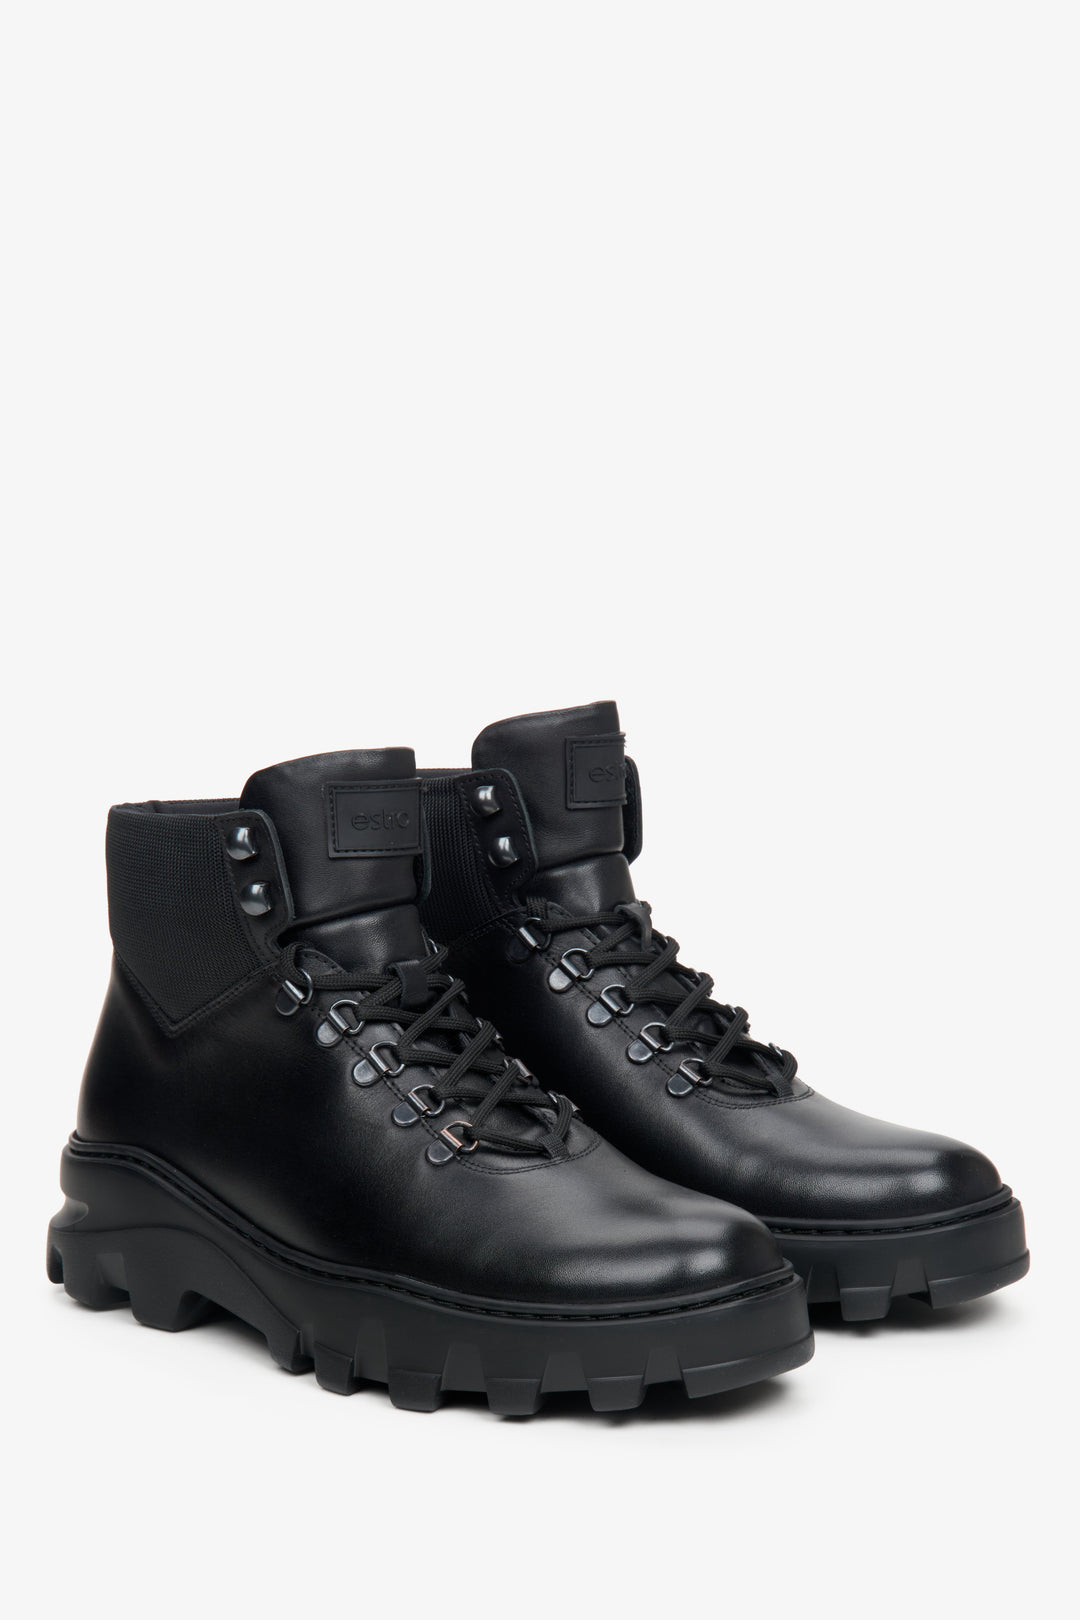 High-top men's black leather boots.